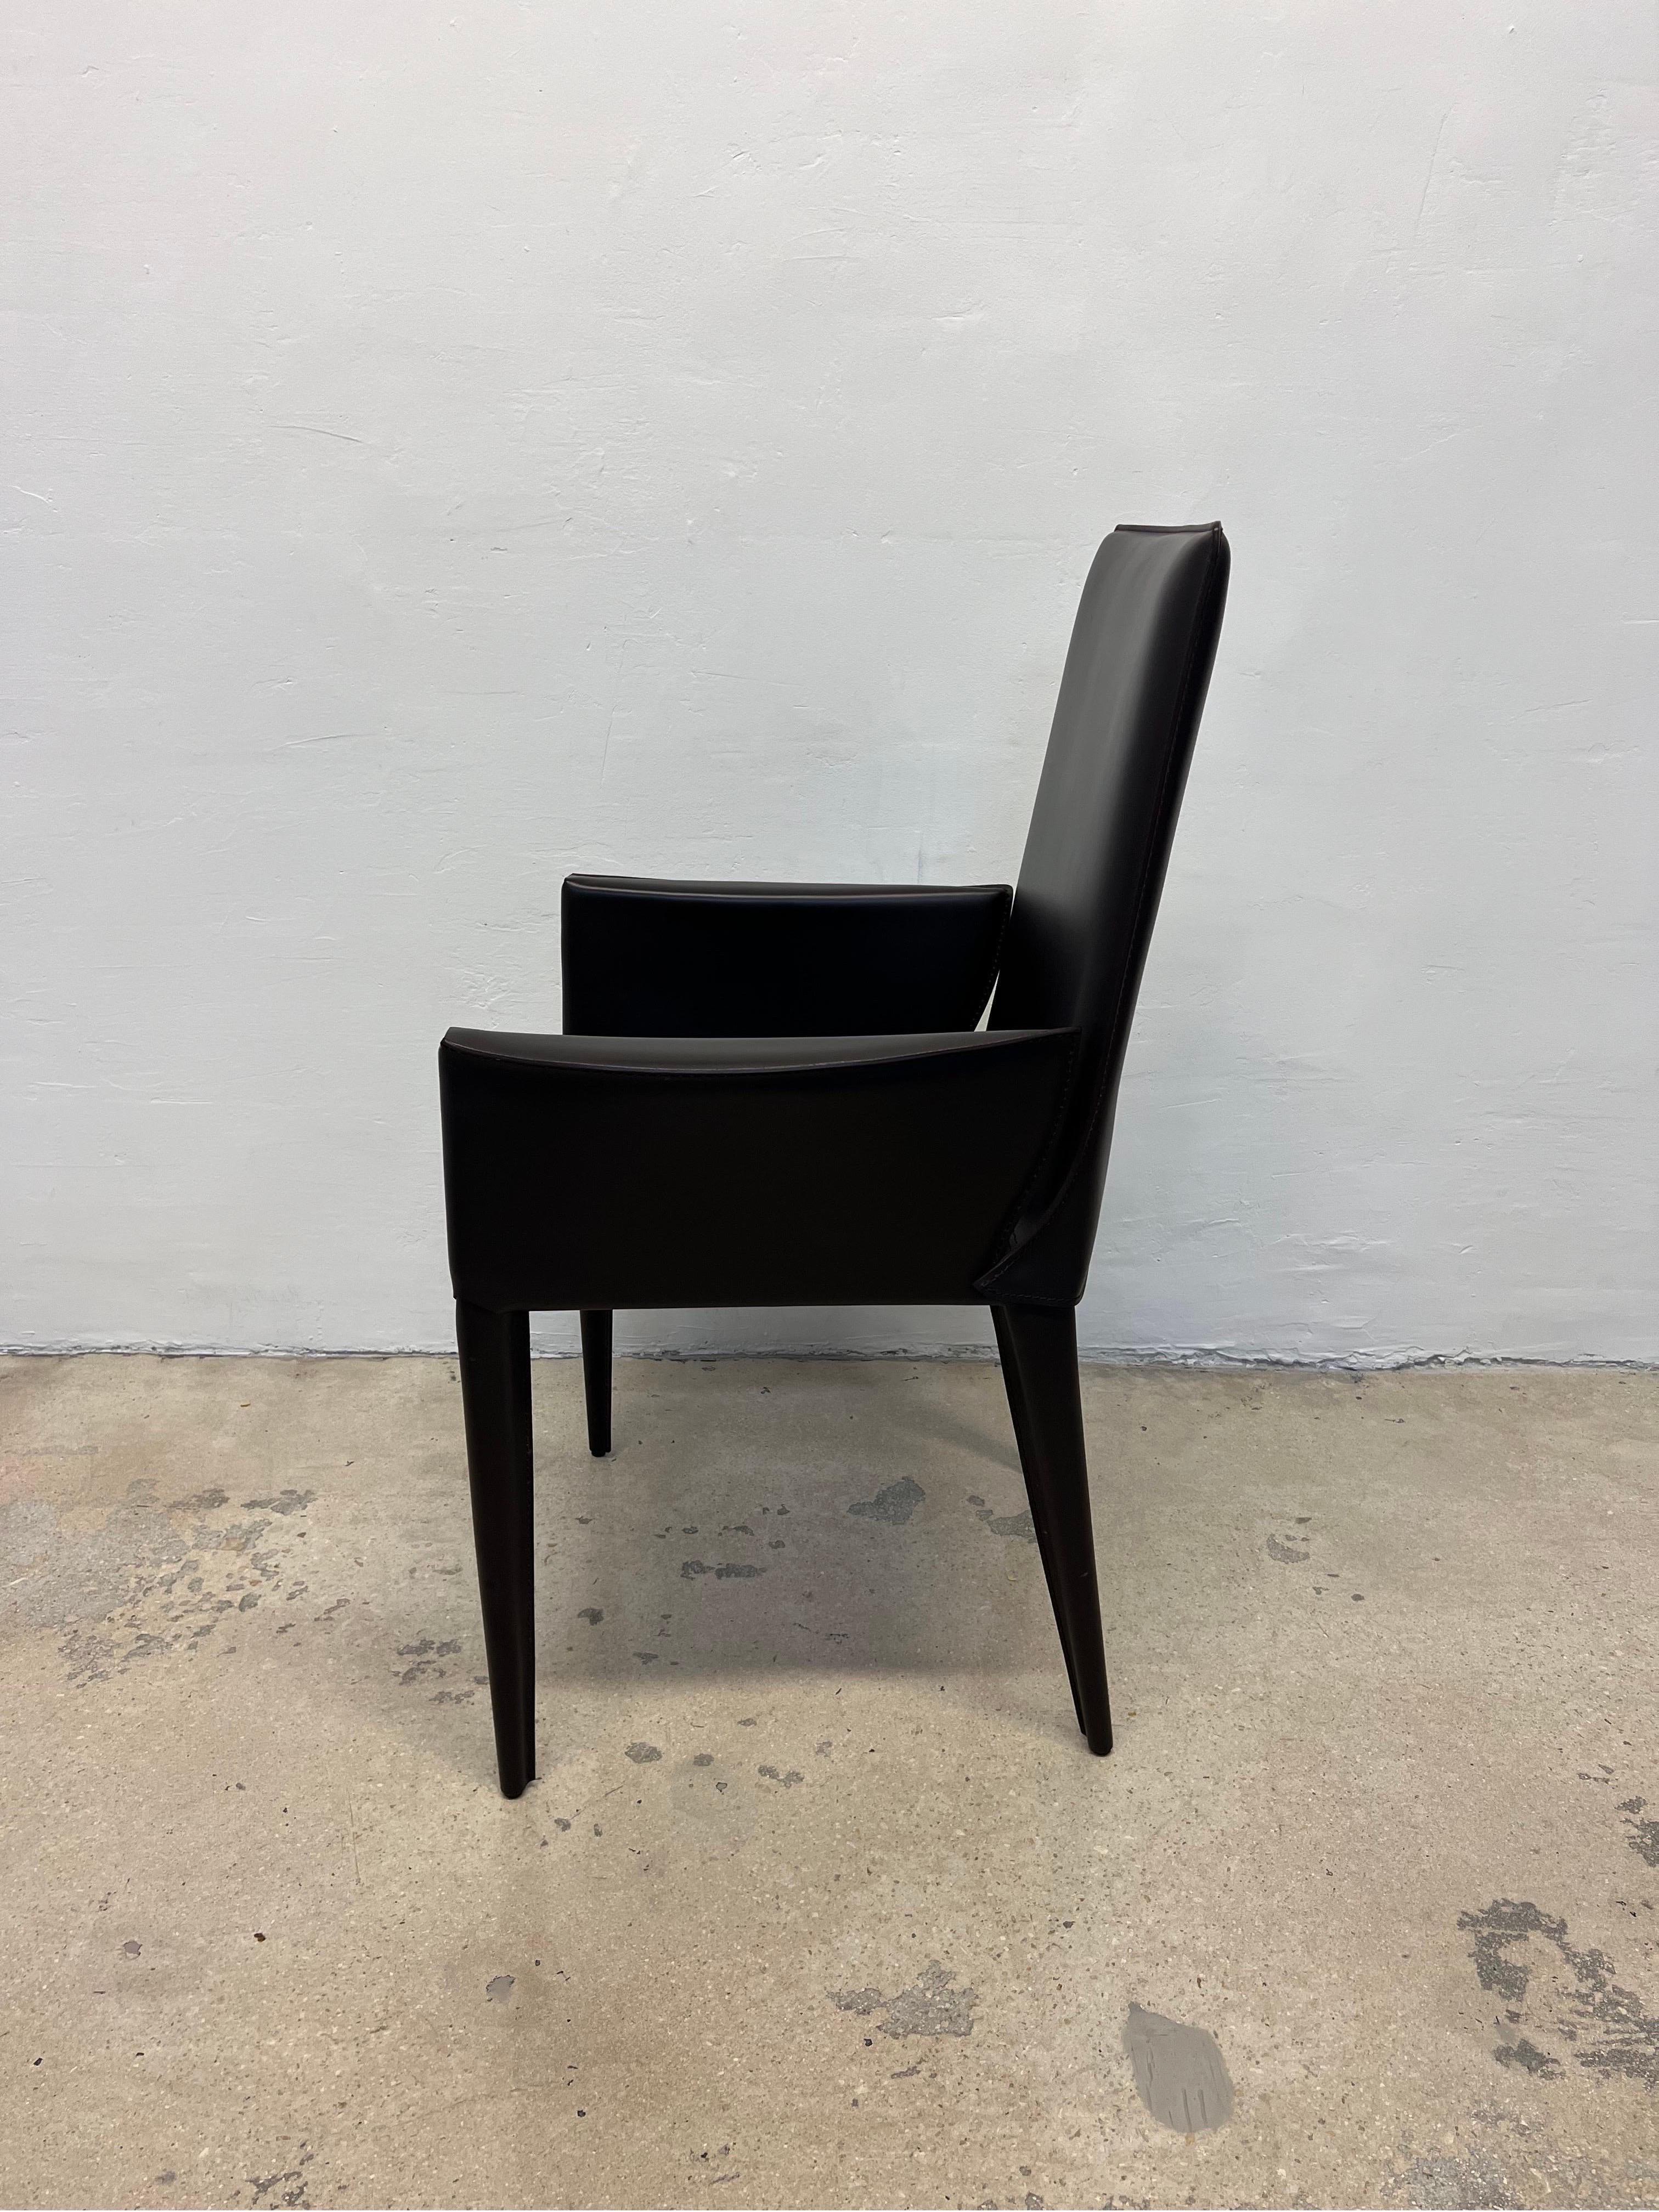 Bottega Leather Dining Arm Chairs by Fauciglietti and Bianchi for DWR, Pair In Good Condition For Sale In Miami, FL